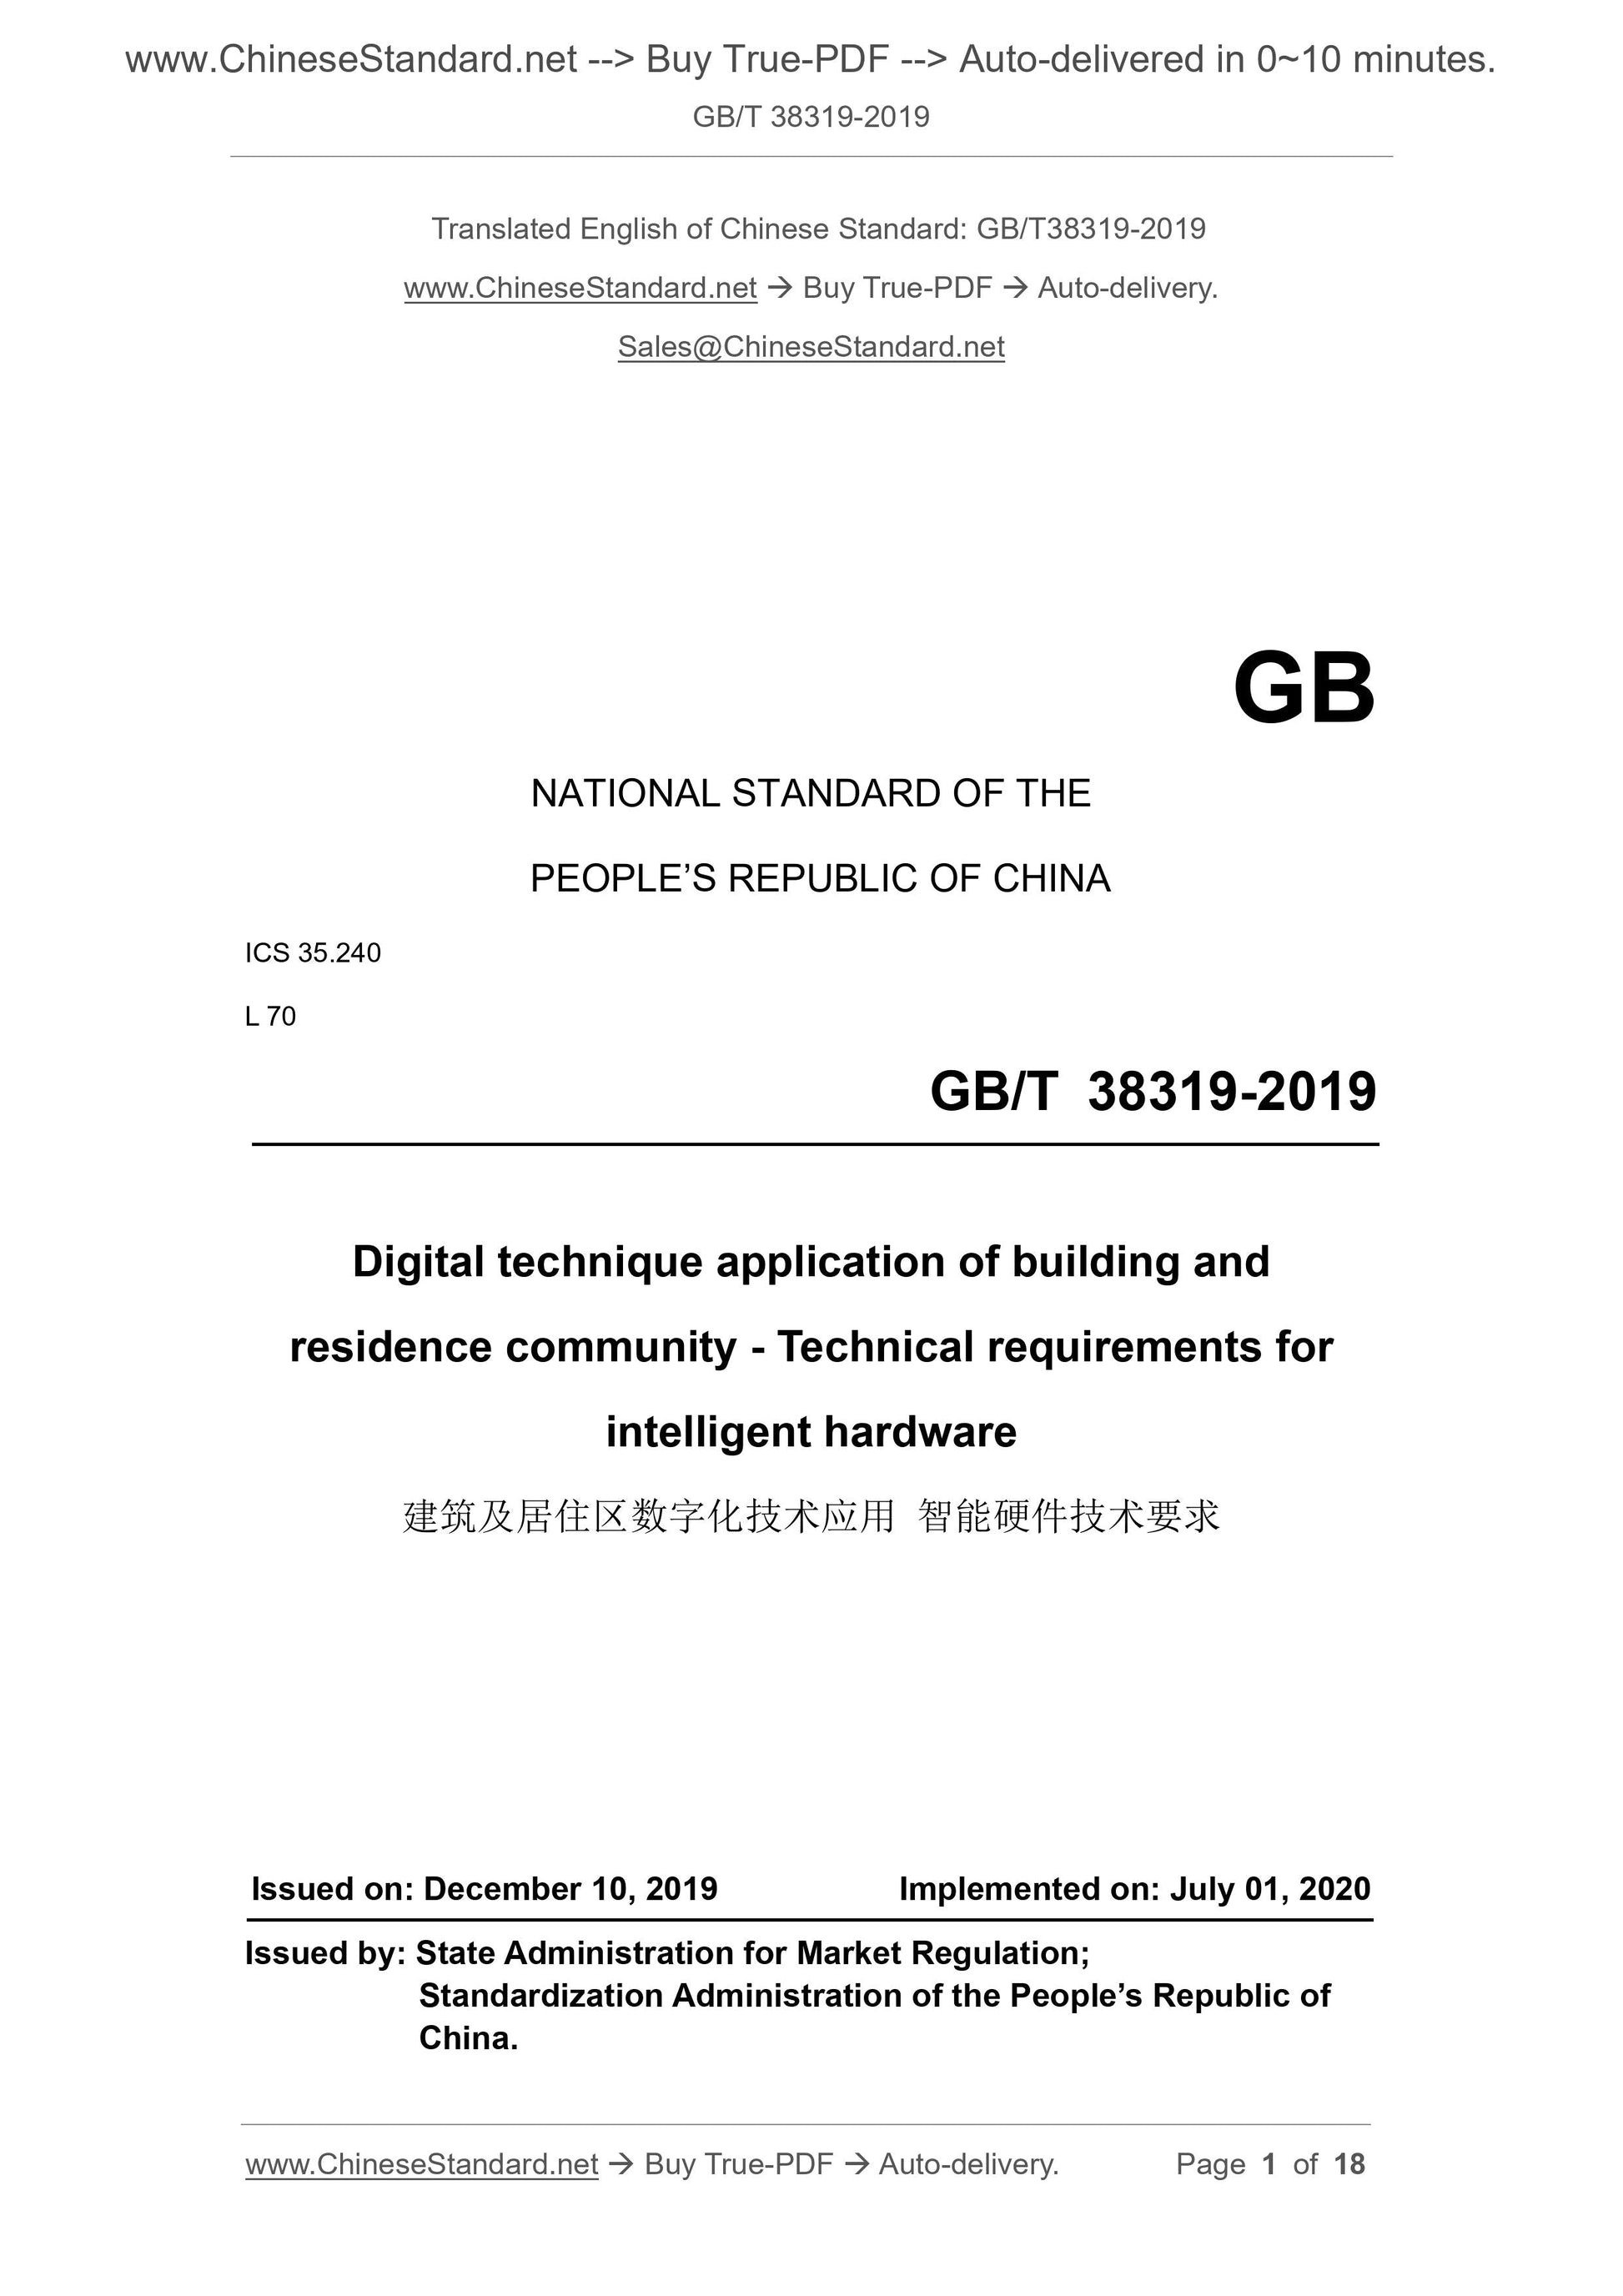 GB/T 38319-2019 Page 1